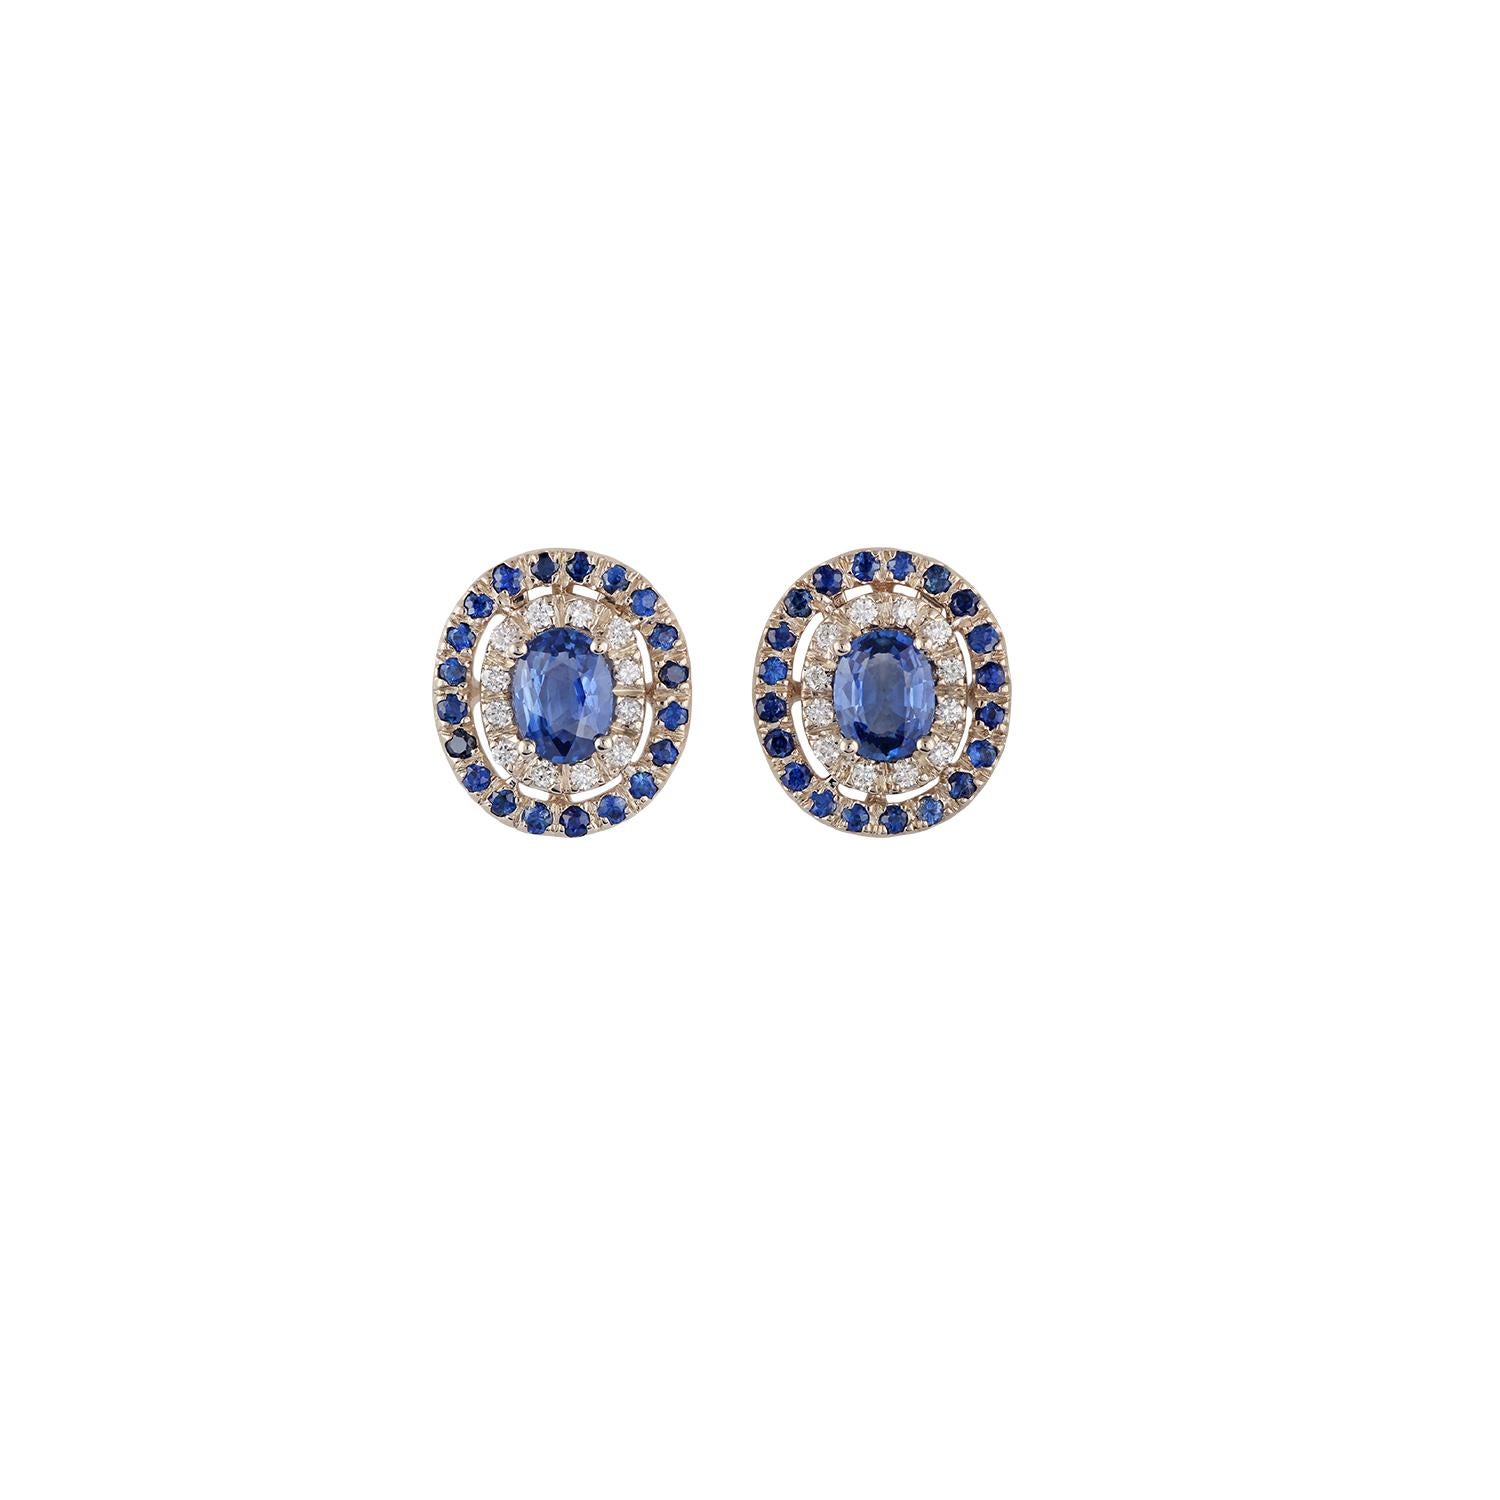 This is an elegant pair of blue sapphire cluster earrings, feature 2 pieces of oval-shaped blue sapphire weight 1.72 carats with 40 pieces of round-shaped blue sapphire weight 0.75 carat & 24 pieces of round shaped brilliant cut diamonds weight 0.23